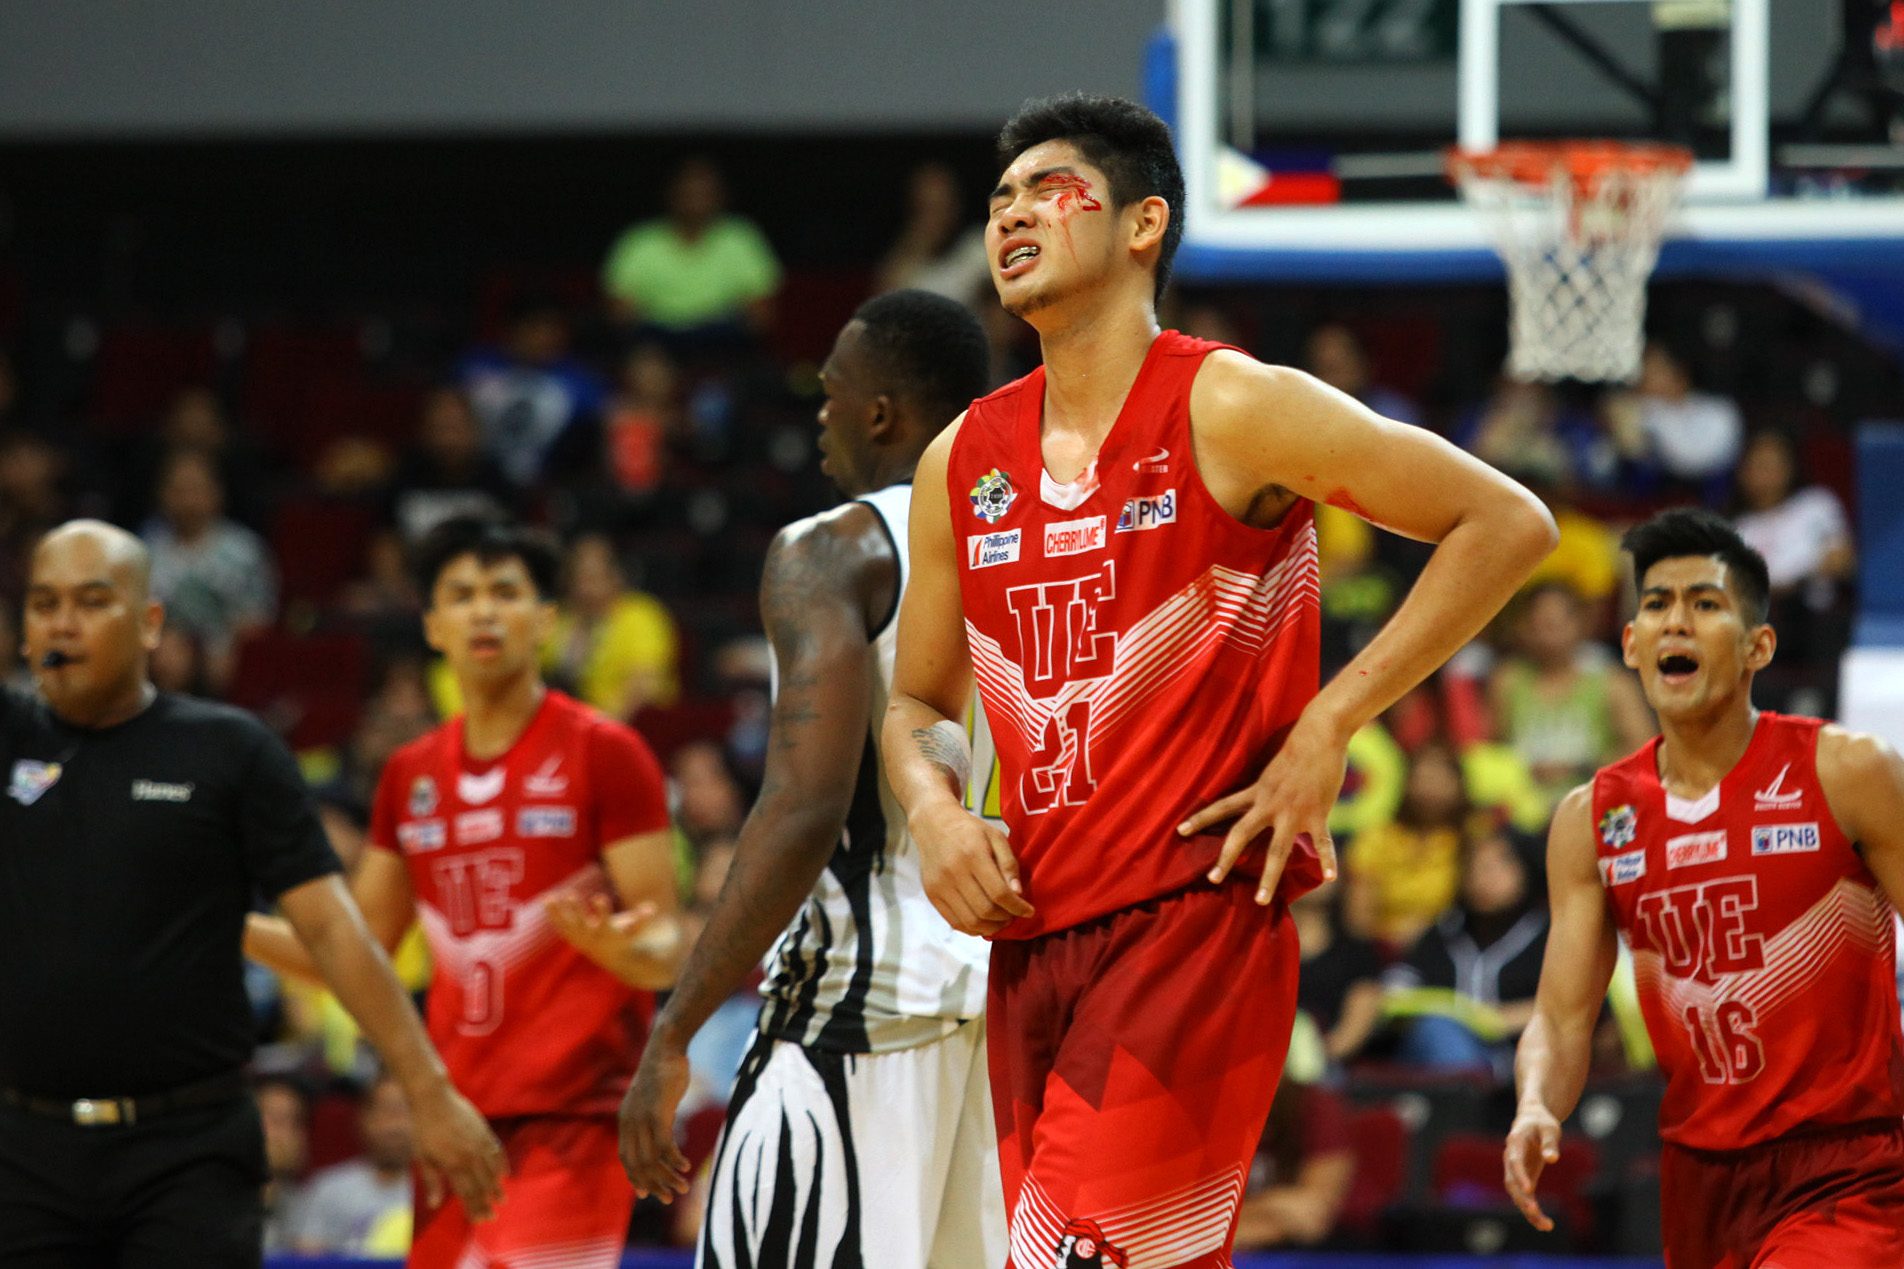 UE center Bartolome to get stitches after cut to eyebrow